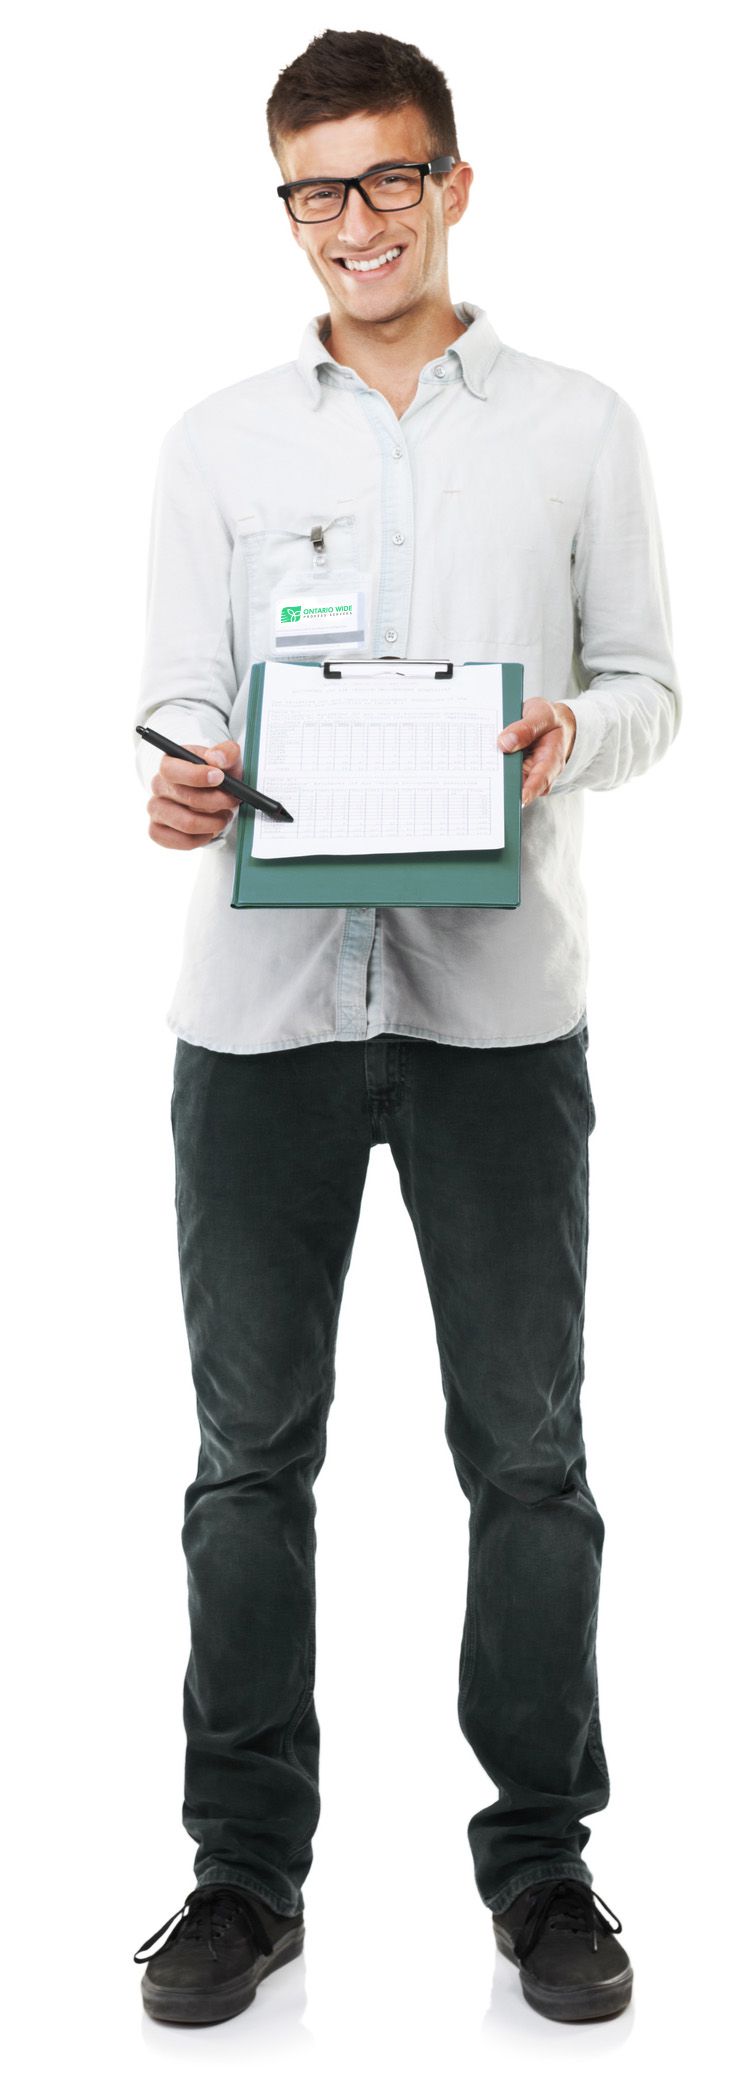 guy holding clipboard